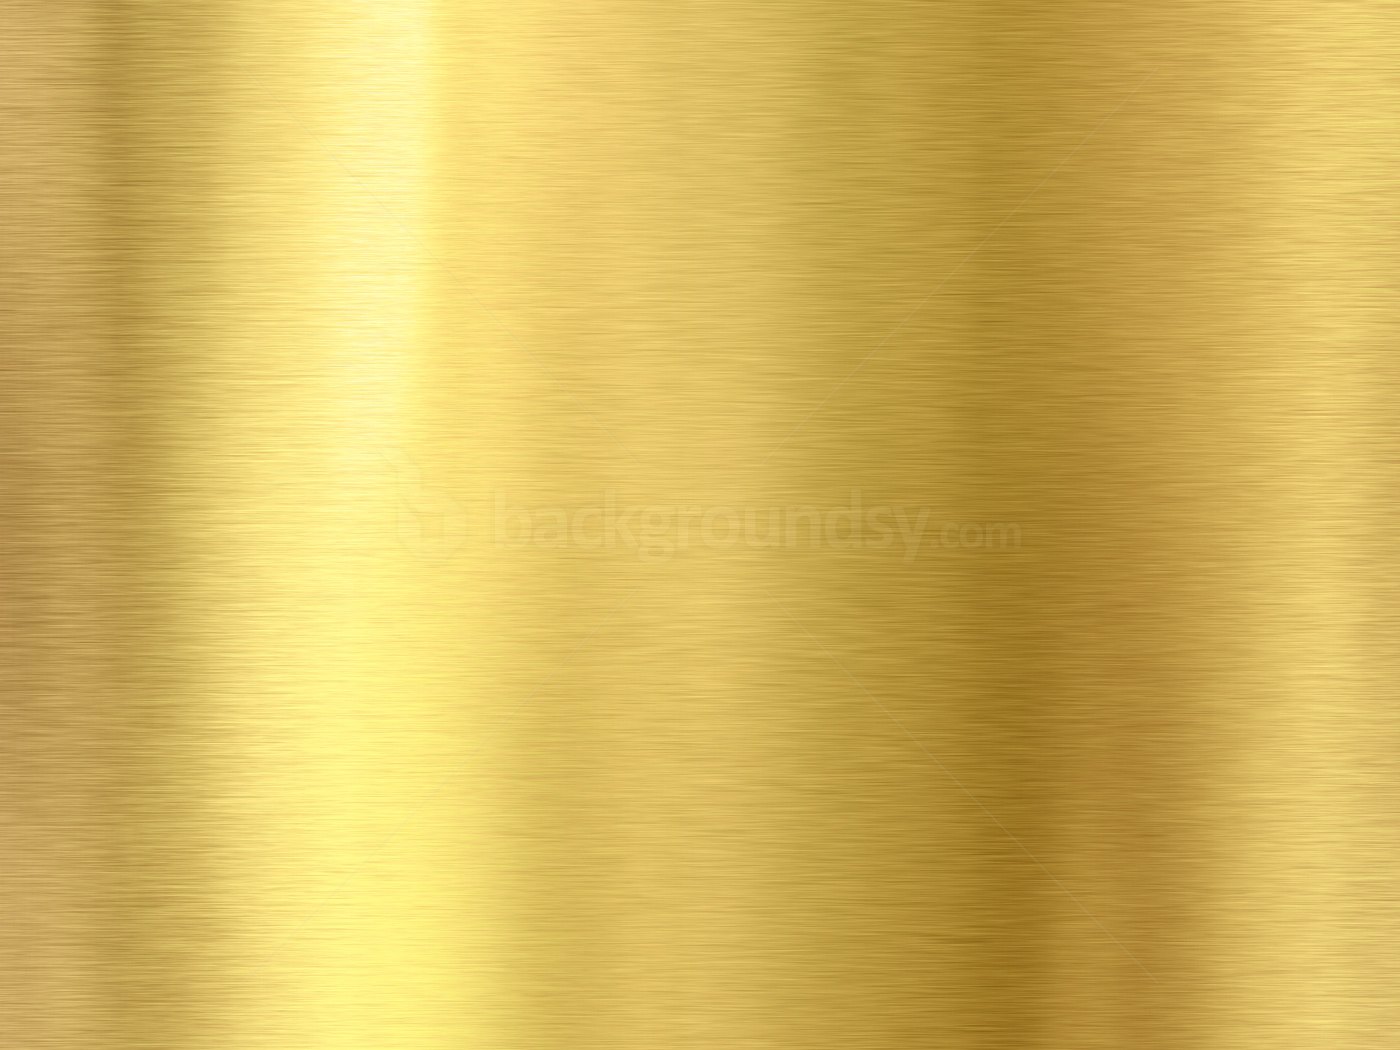 This Is The Gold Metal Texture Image You Can Use To Google   image